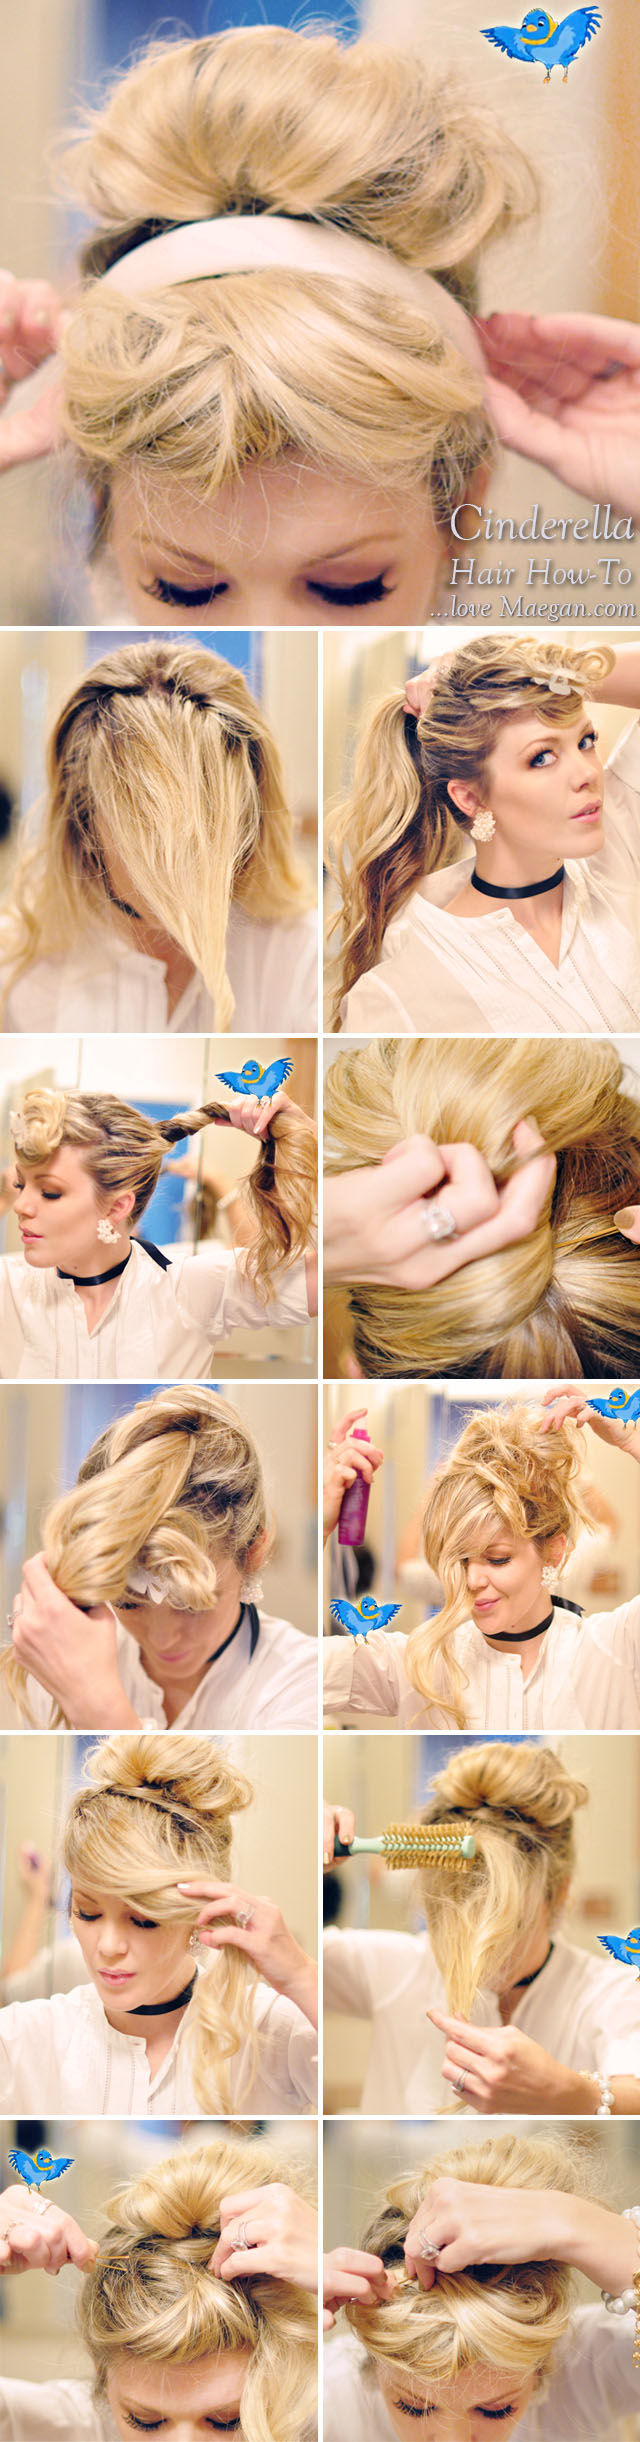 hair style how-to